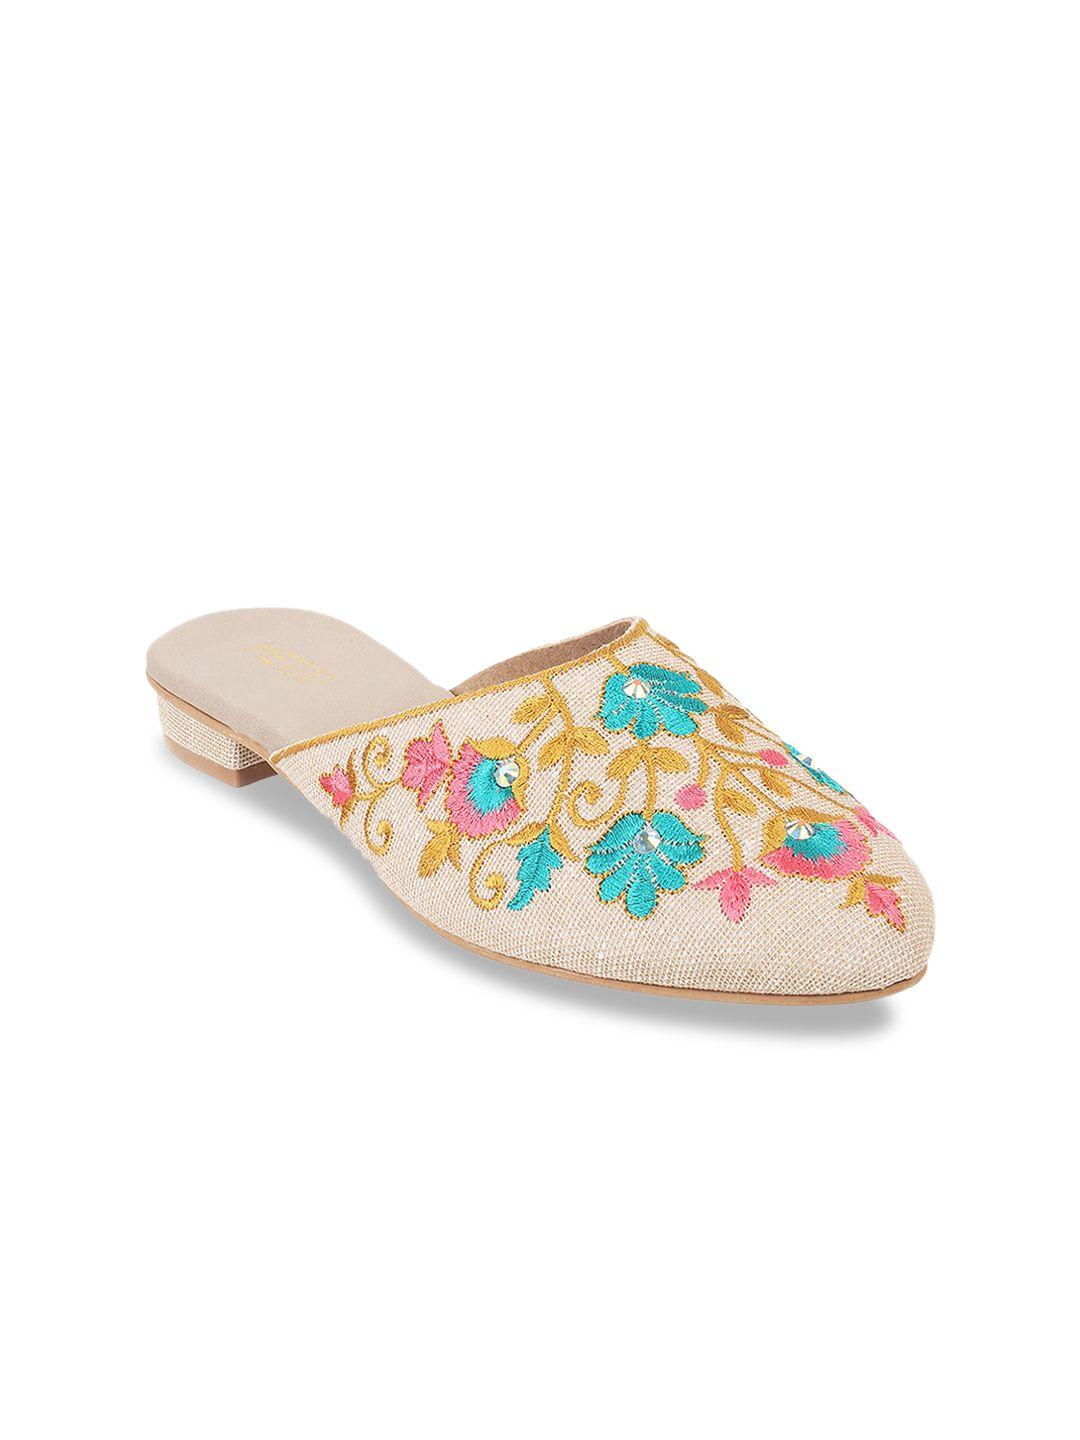 metro floral embellished embroidered mules